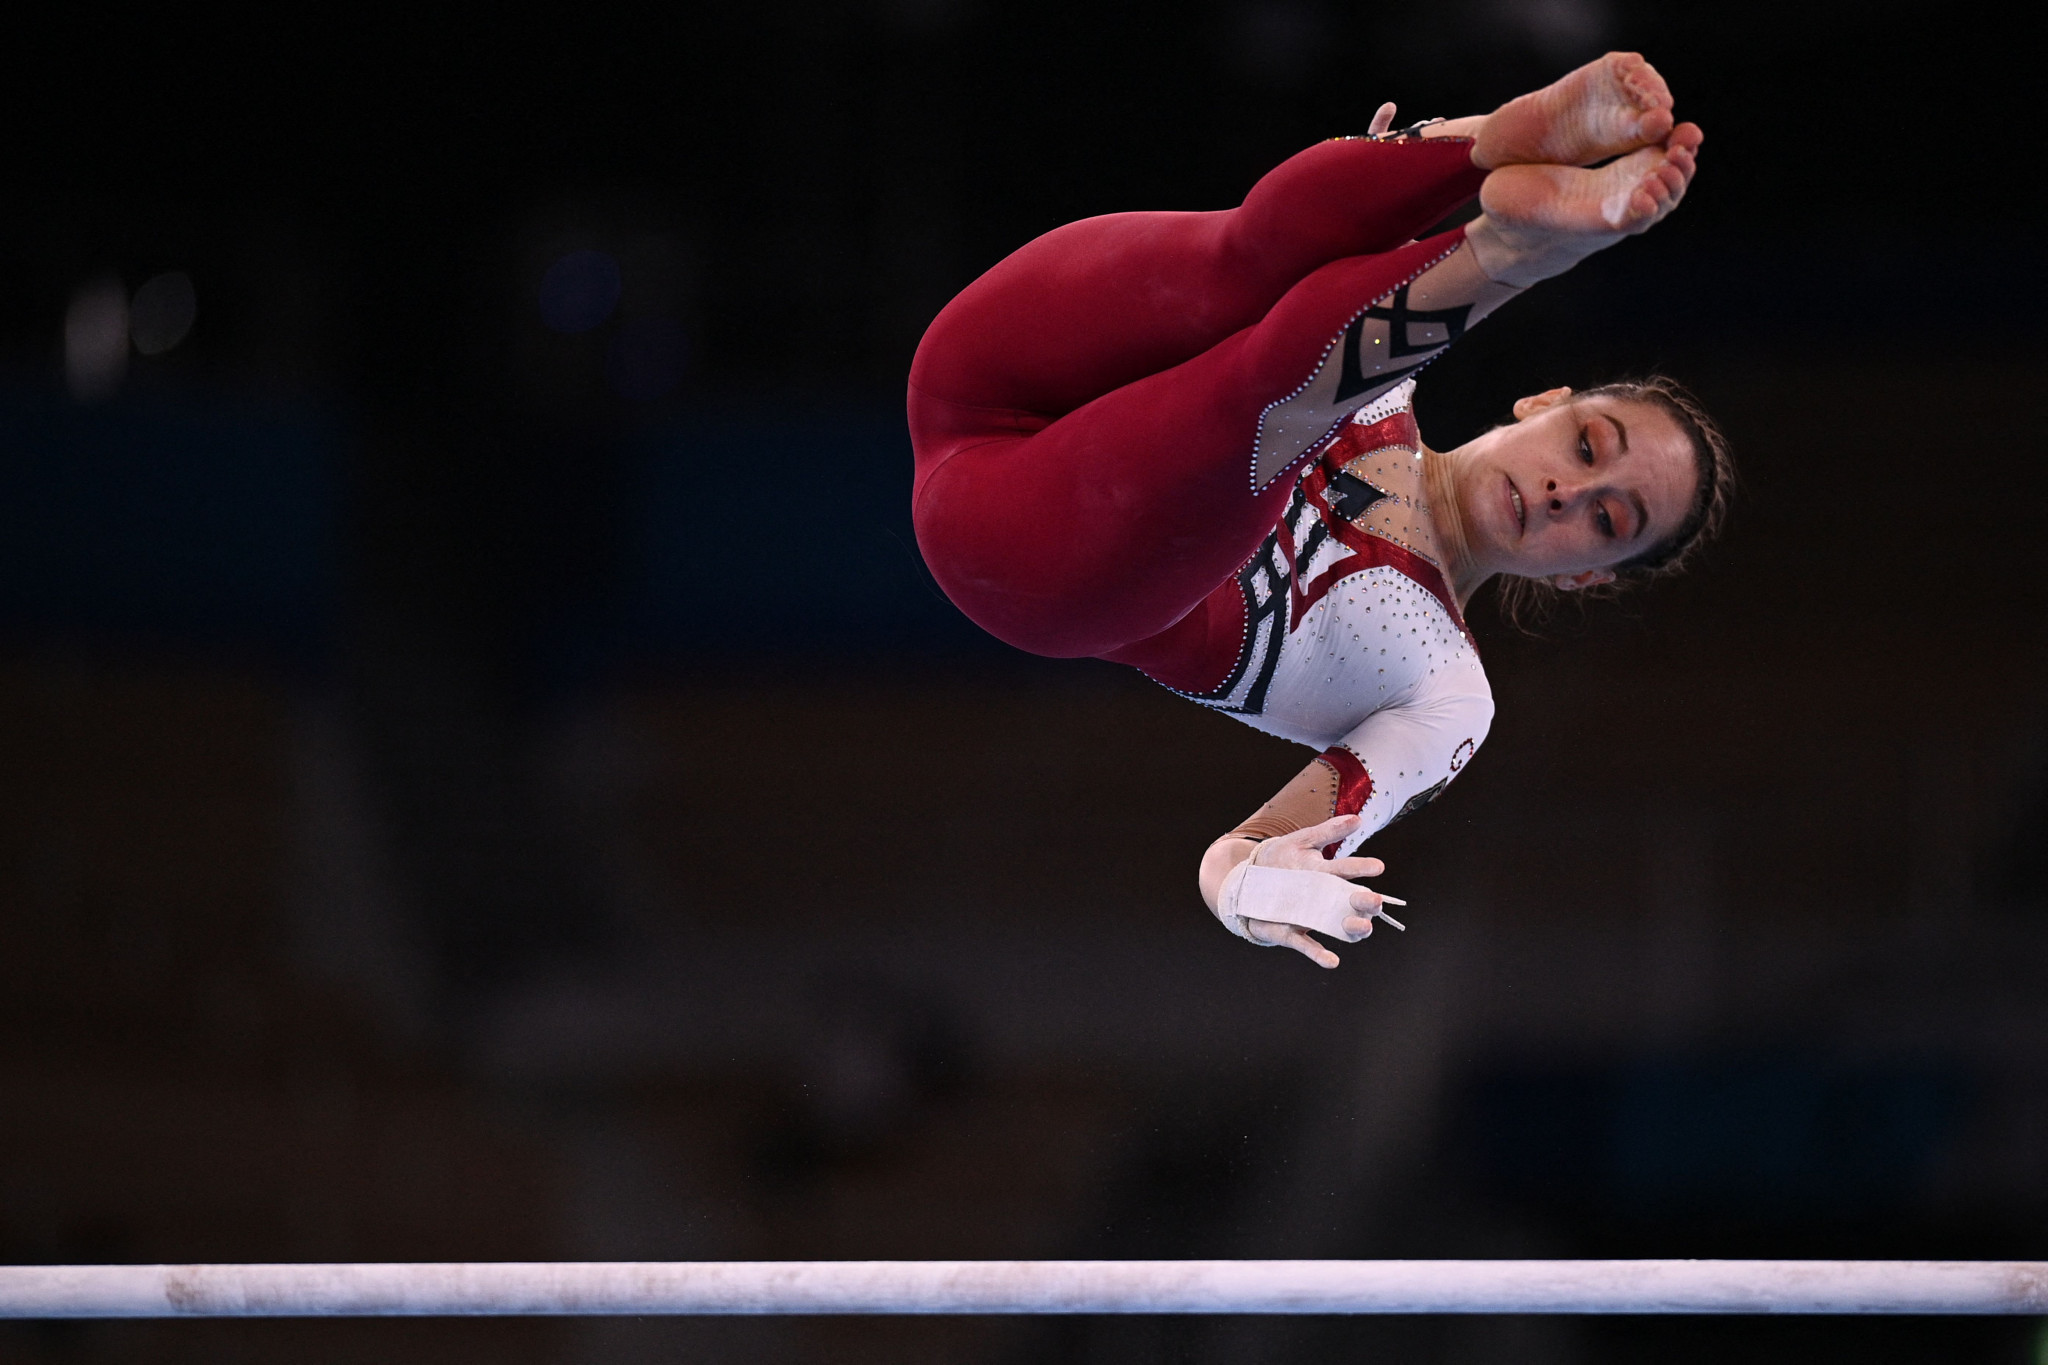 The German gymnastics team changed their outfit to protest sexualisation of women ©Getty Images